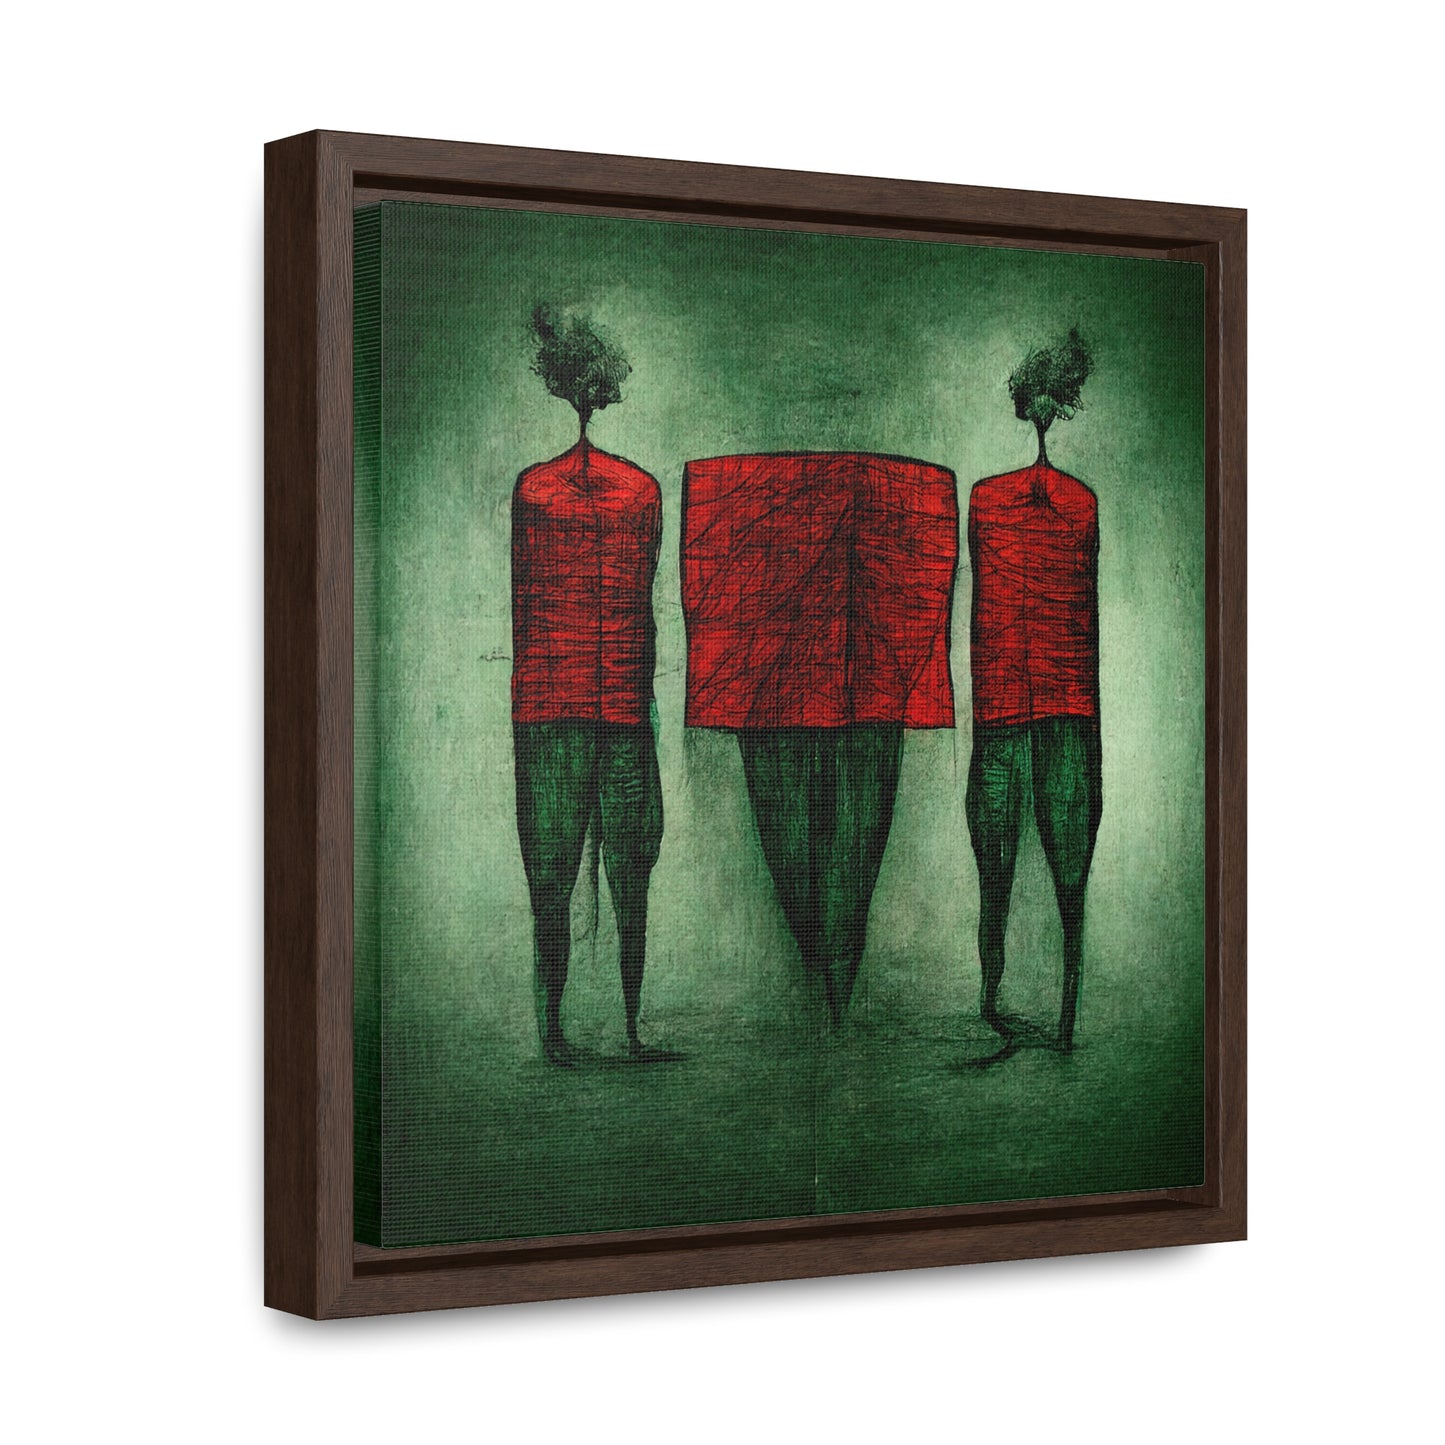 Loneliness Green Red 22, Valentinii, Gallery Canvas Wraps, Square Frame